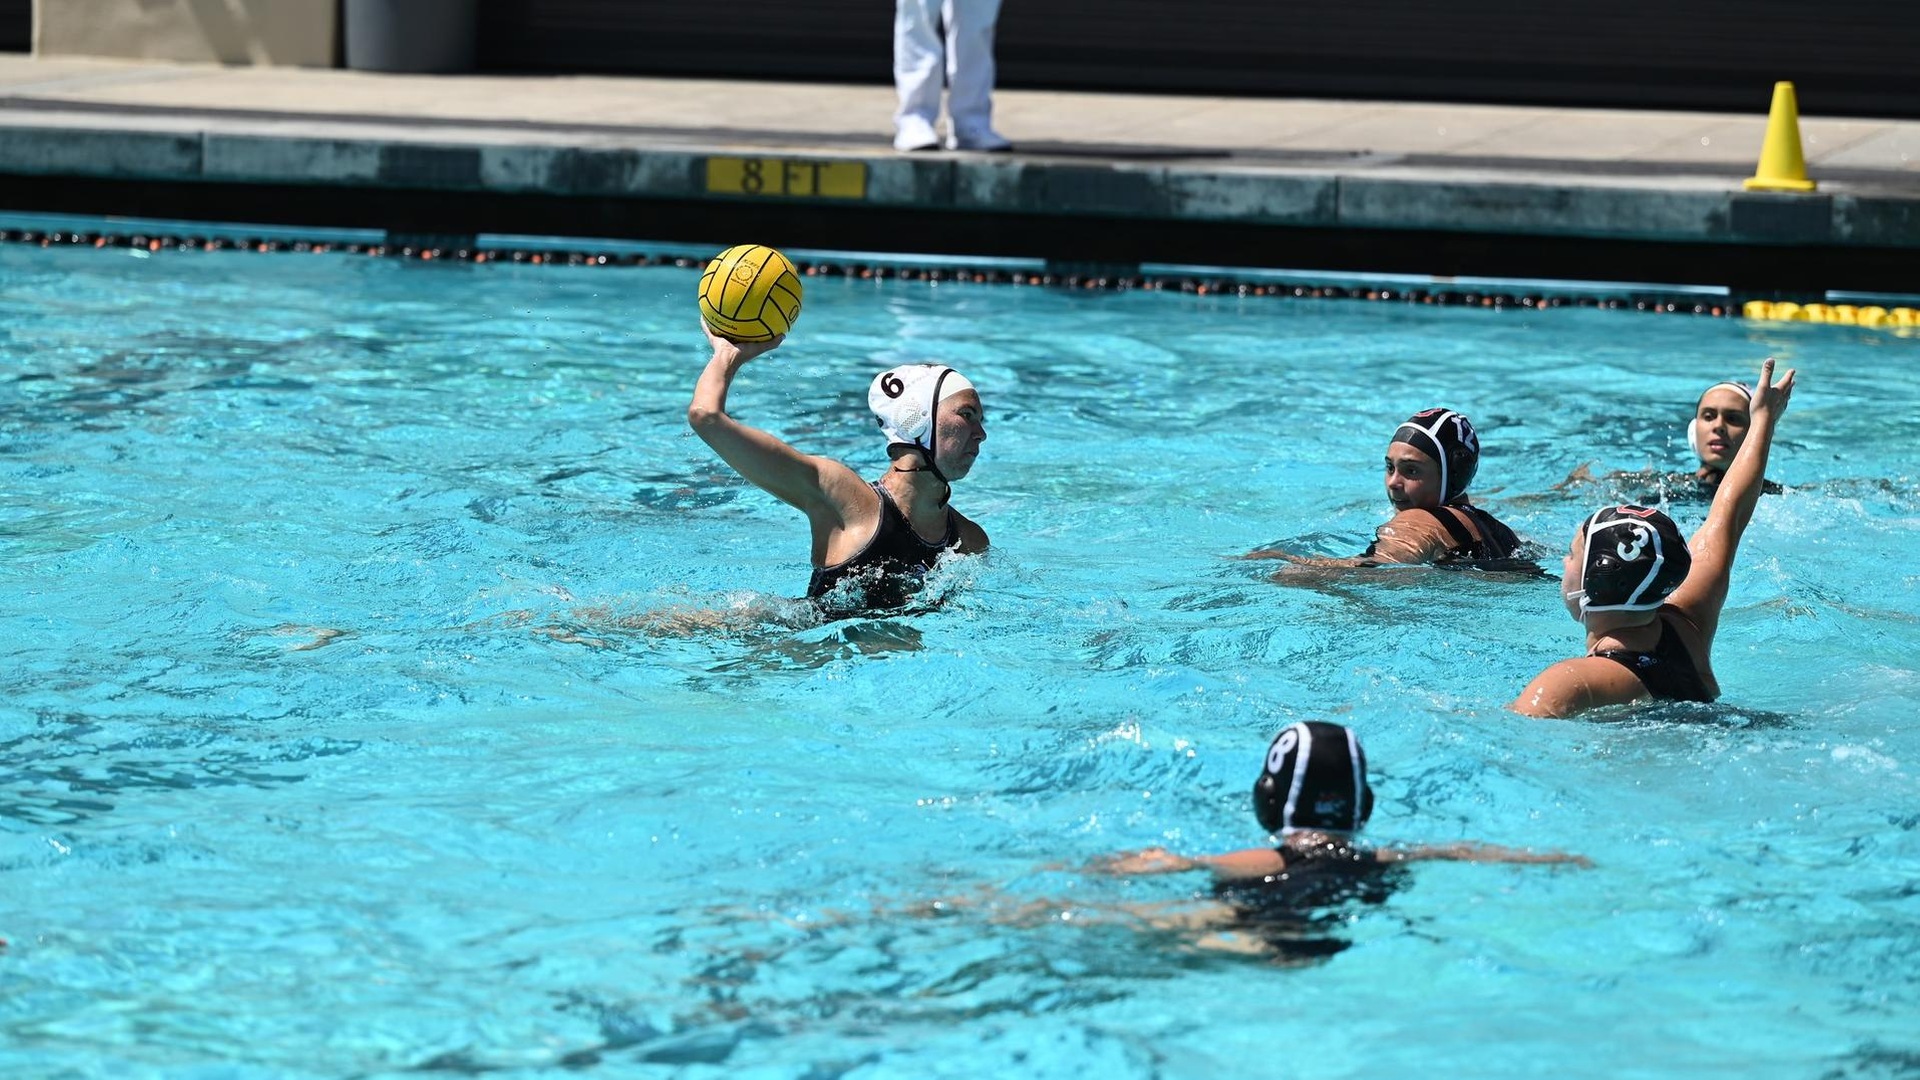 Fiona Murphy scores one of her two goals against Oxy (photo by Kelly Young)